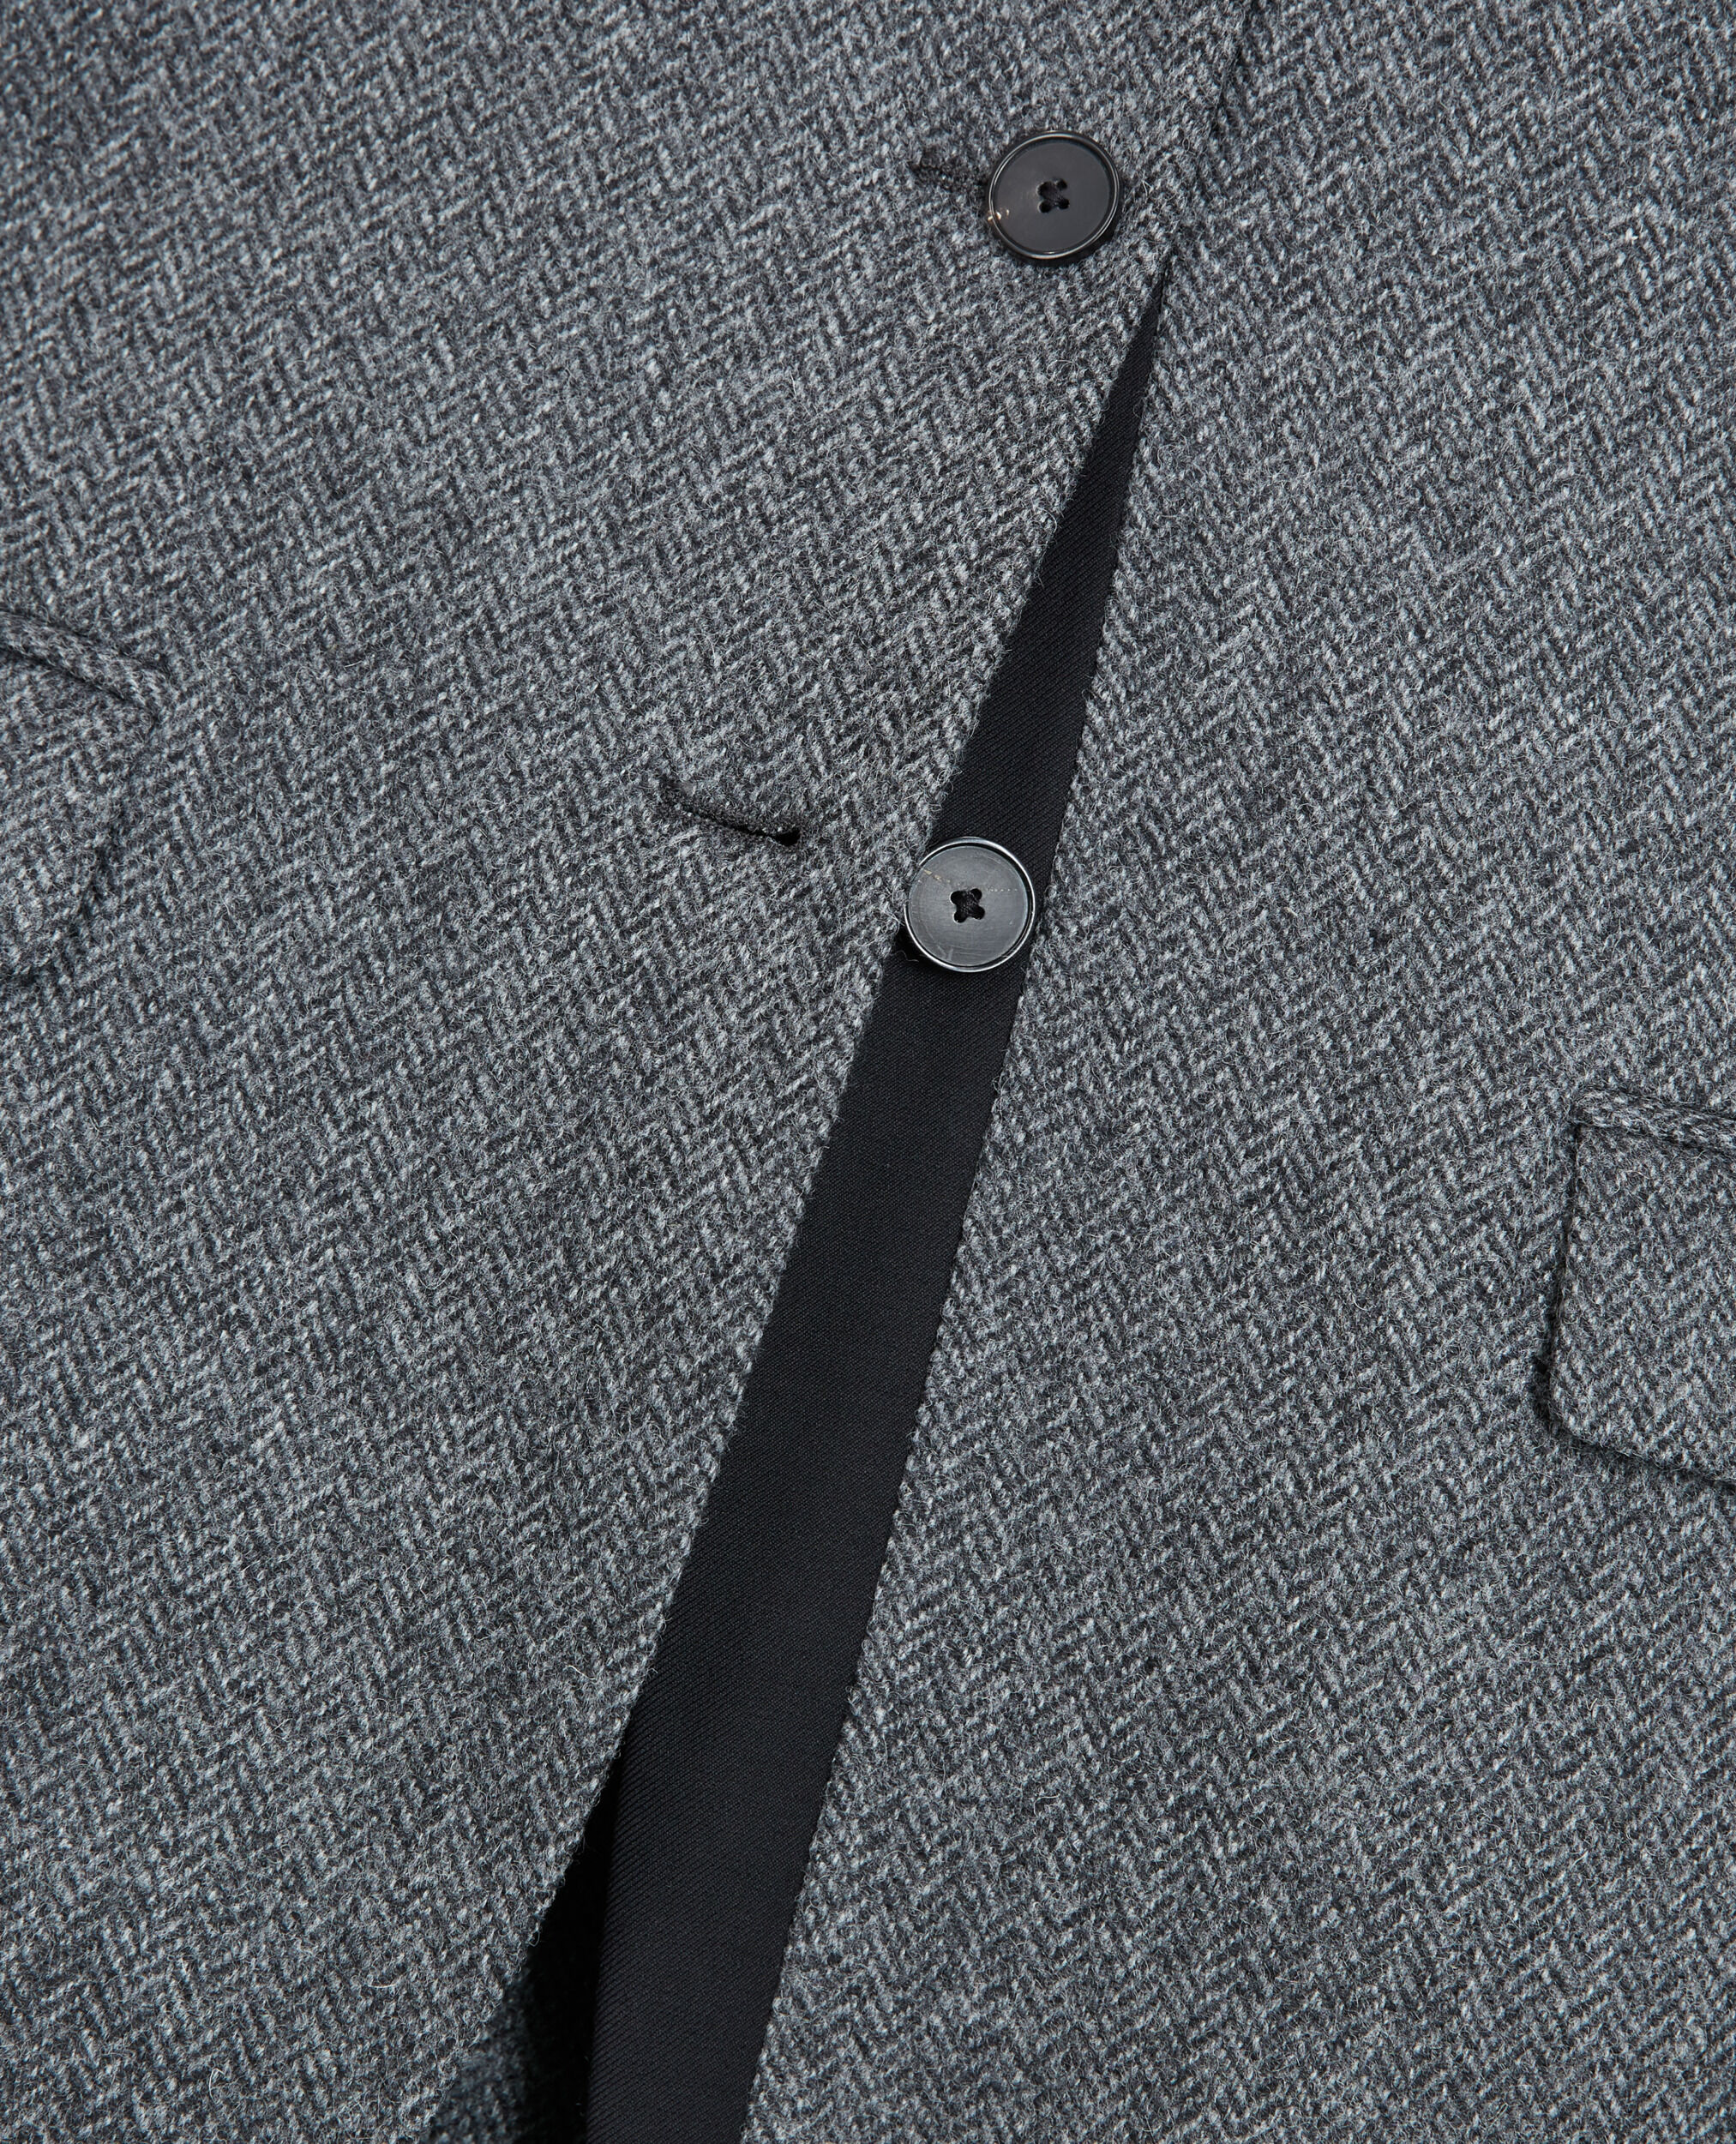 Wool jacket with gray motif, GREY, hi-res image number null